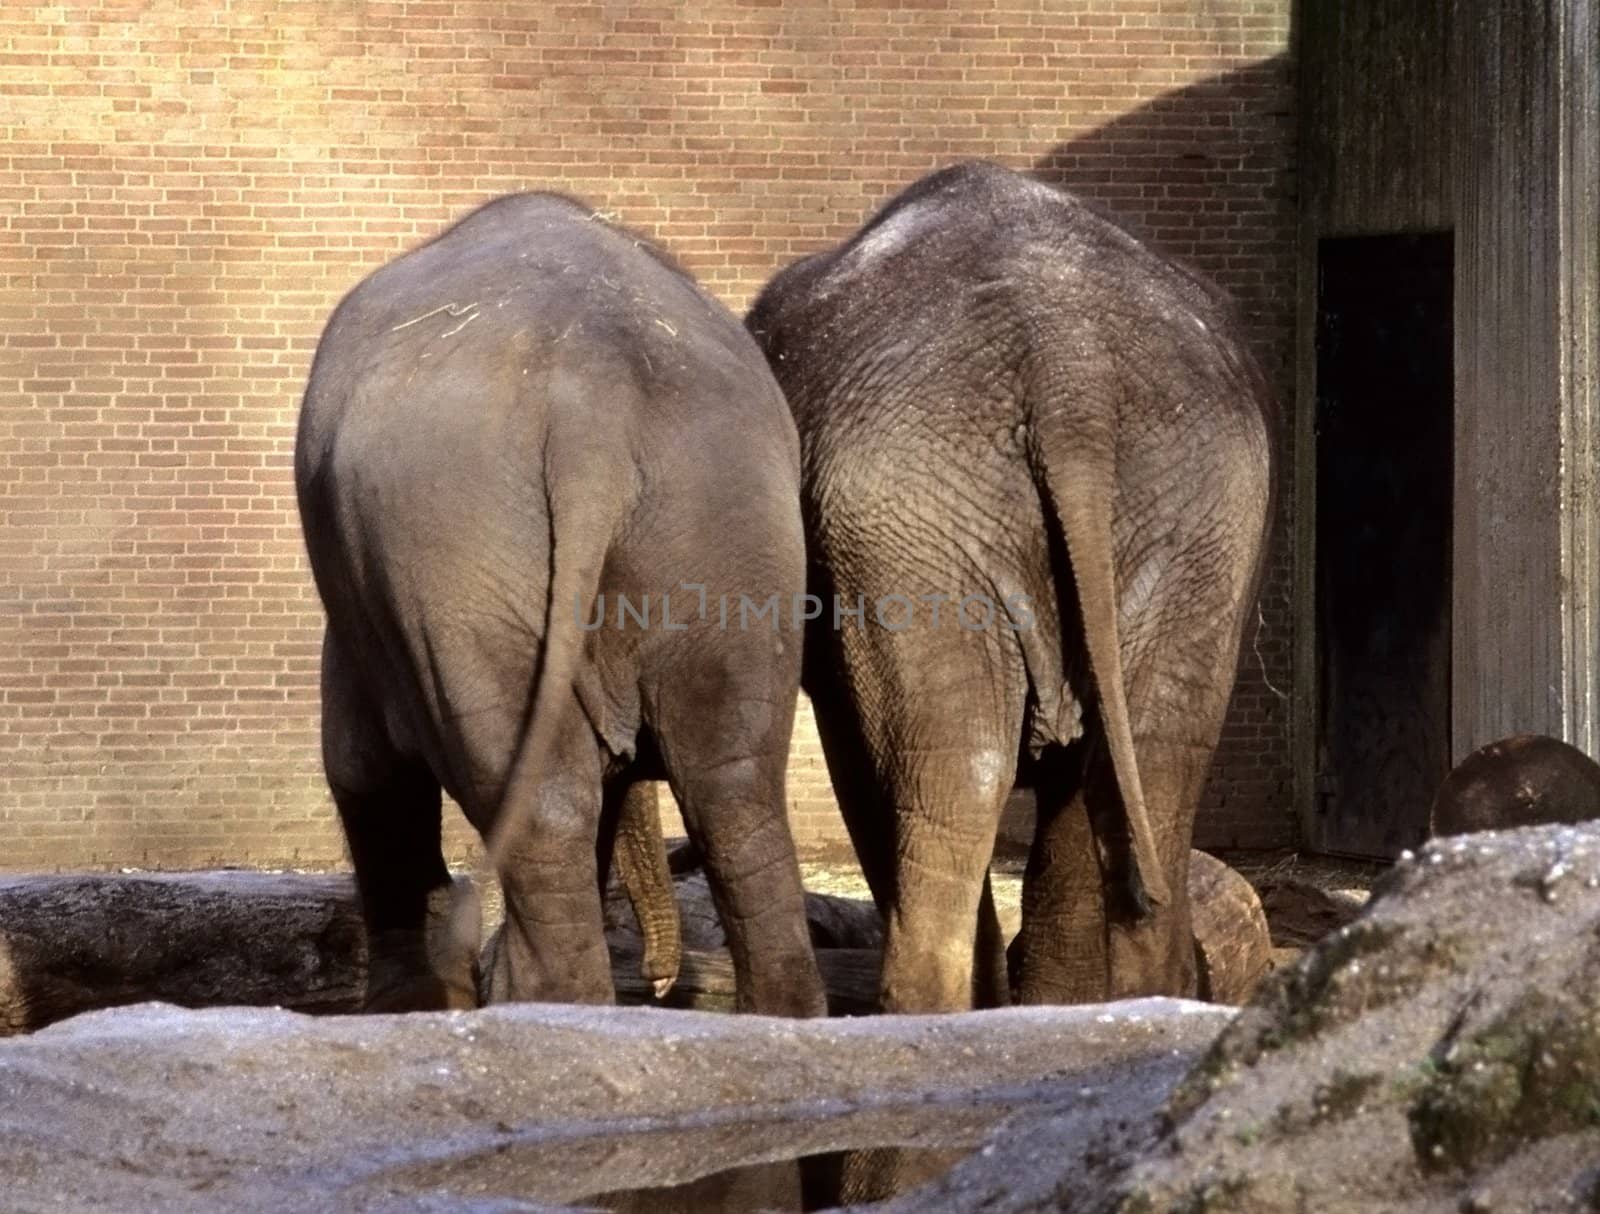 A pair of elephants from behind.